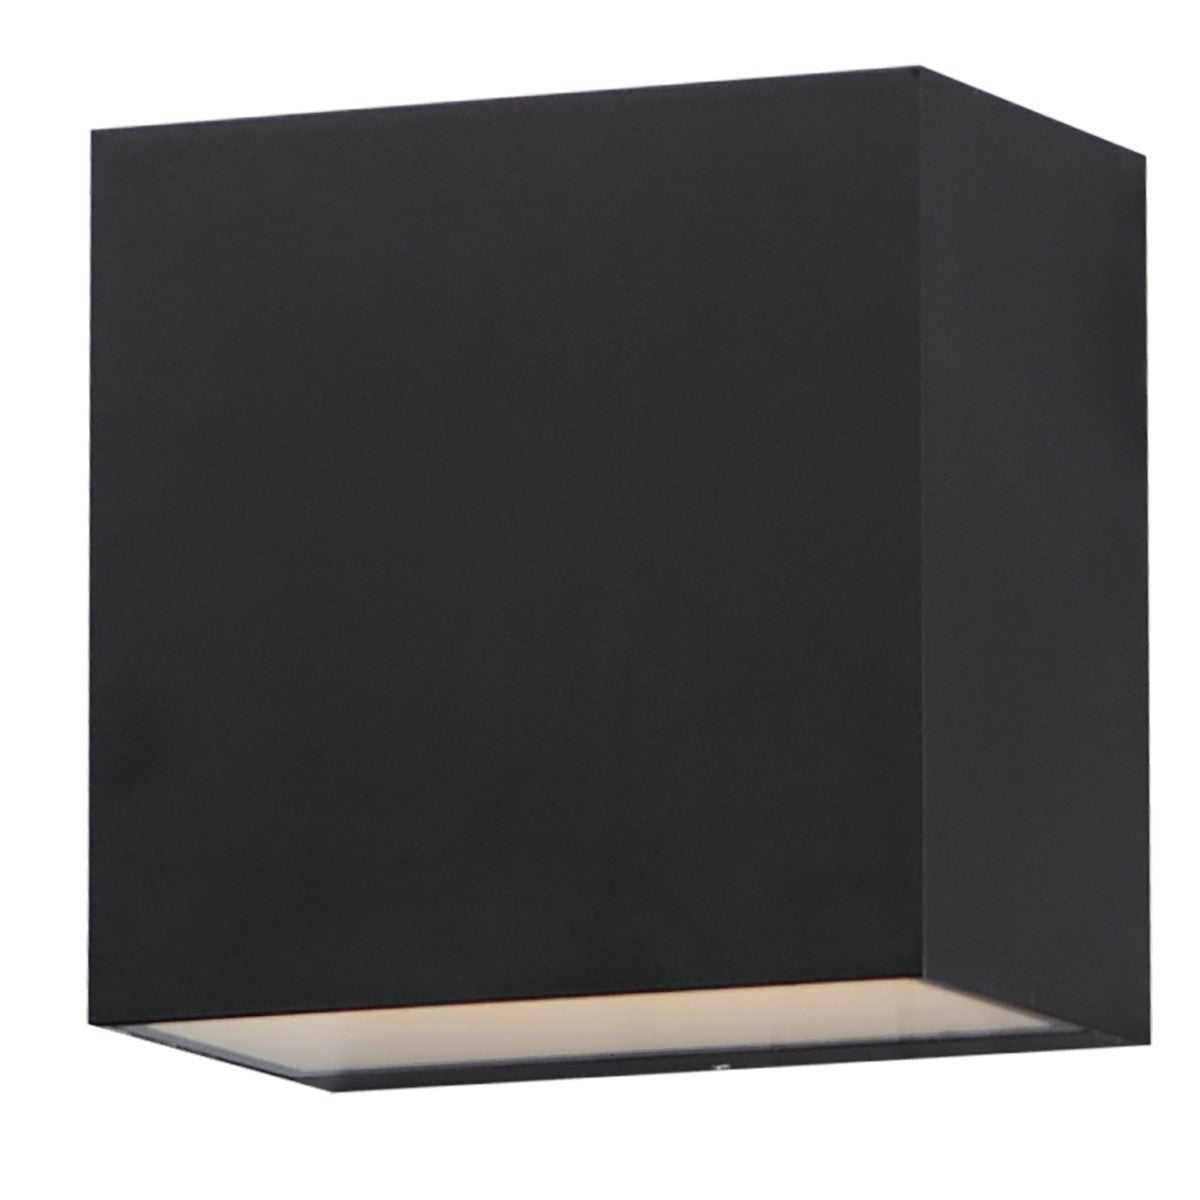 Blok 6 in. LED Outdoor Wall Sconce 3000K - Bees Lighting